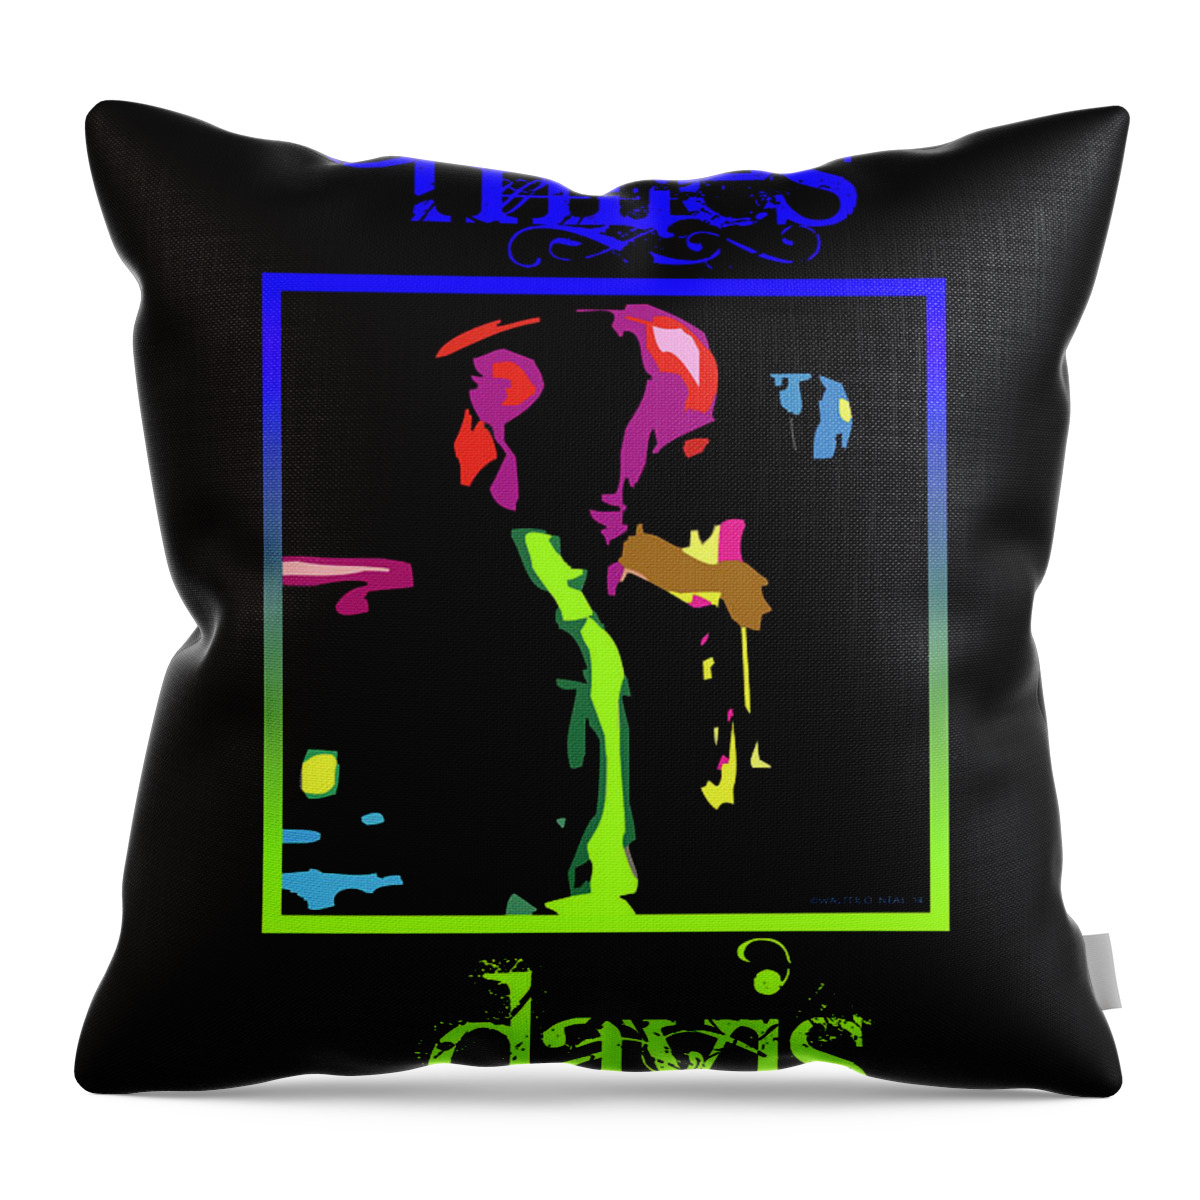 Male Portraits Throw Pillow featuring the digital art Miles Davis #2 by Walter Neal